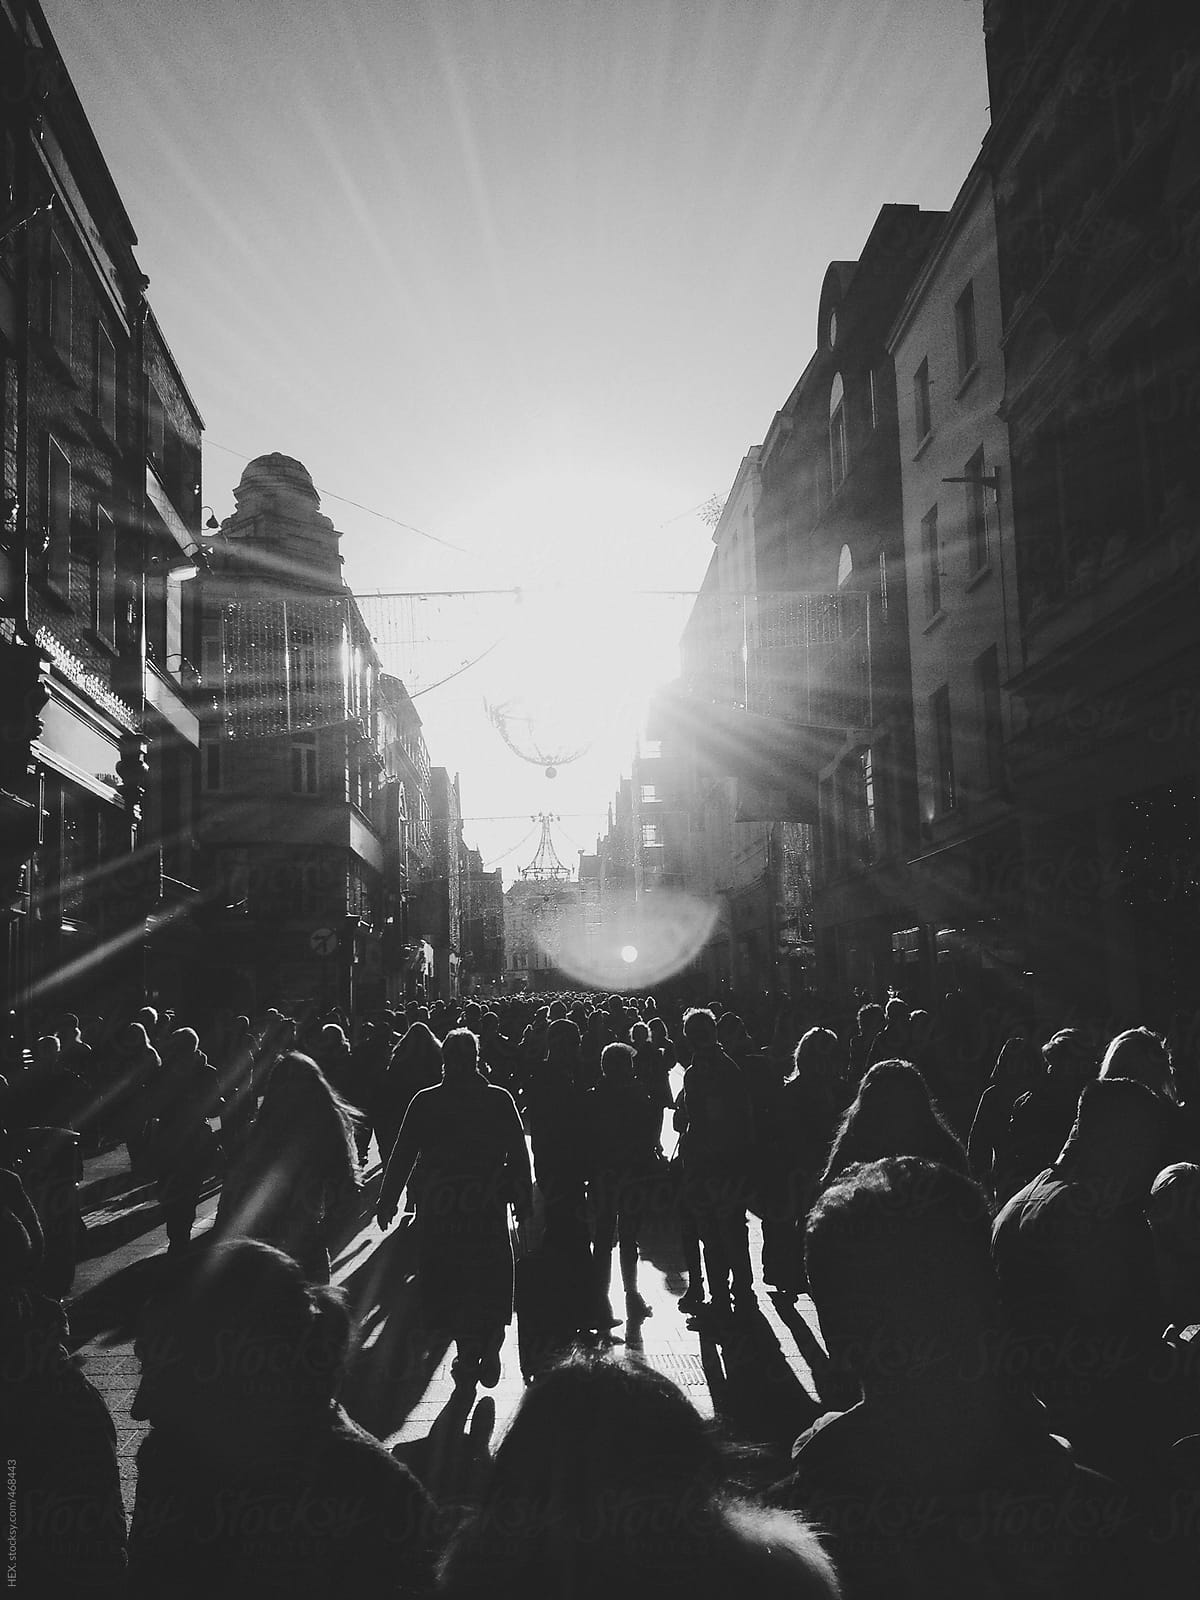 Street Crowded of People During a Sunny Day